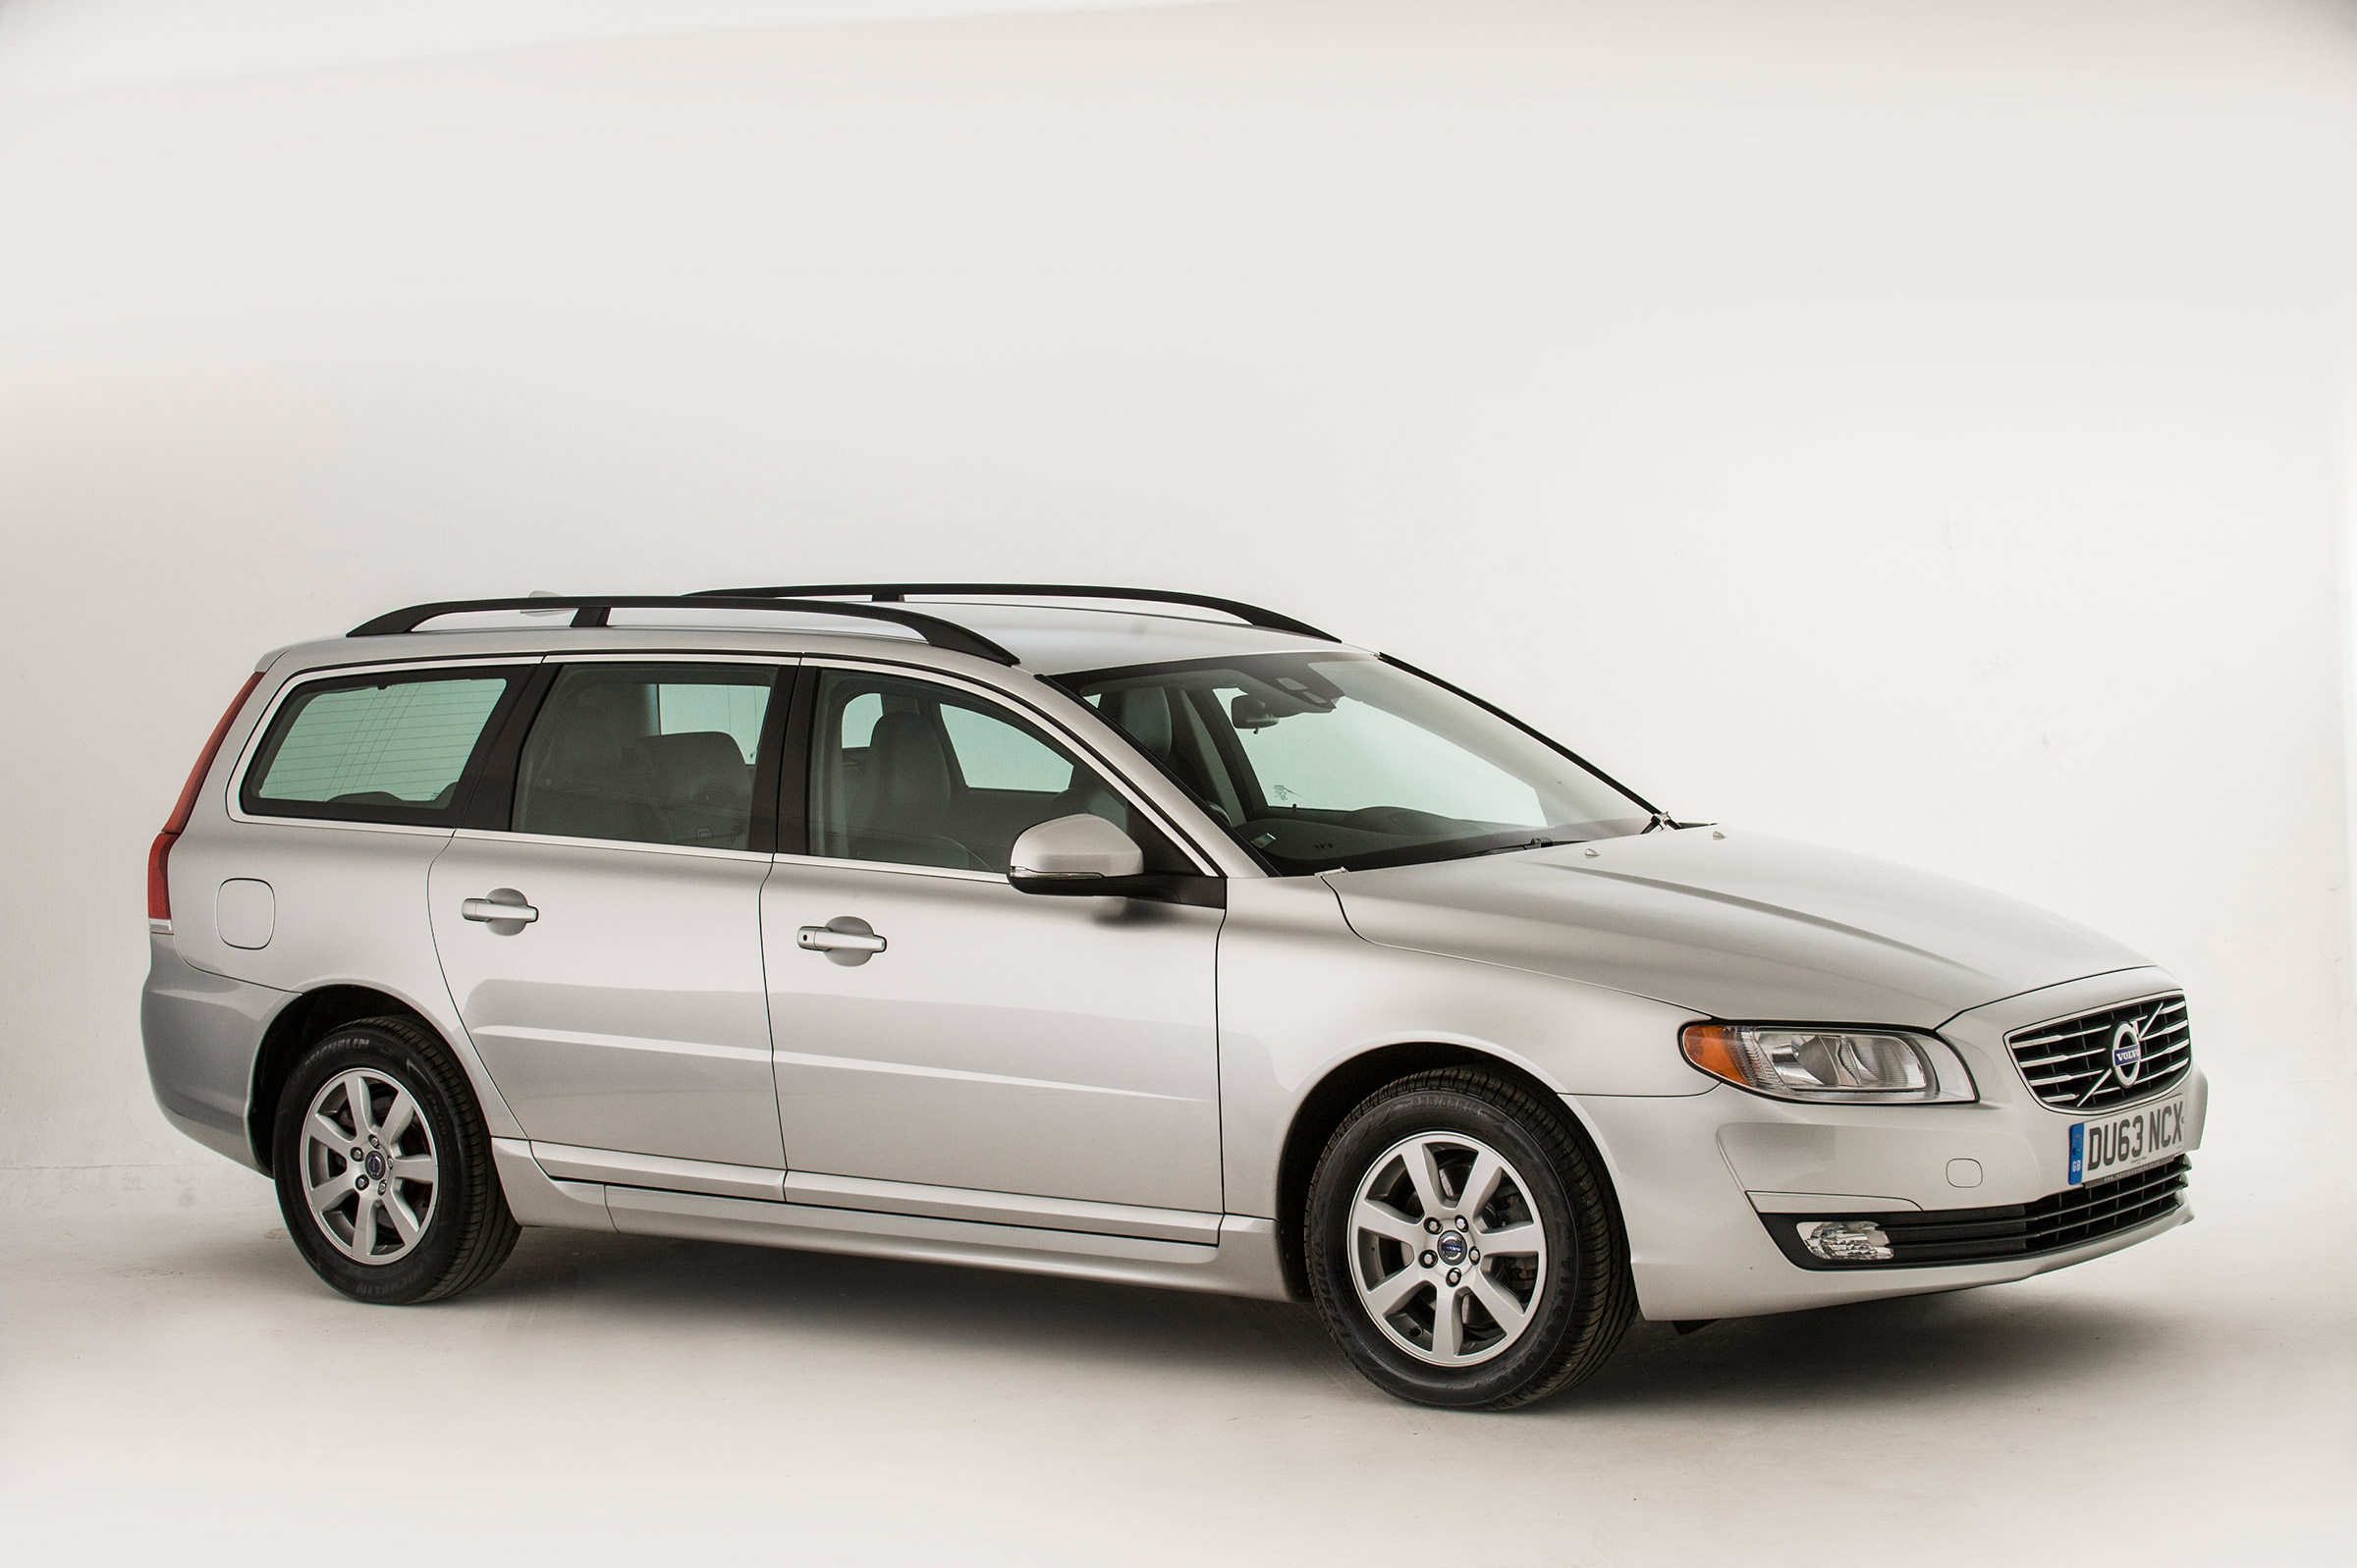 Used Volvo V70 review Auto Express